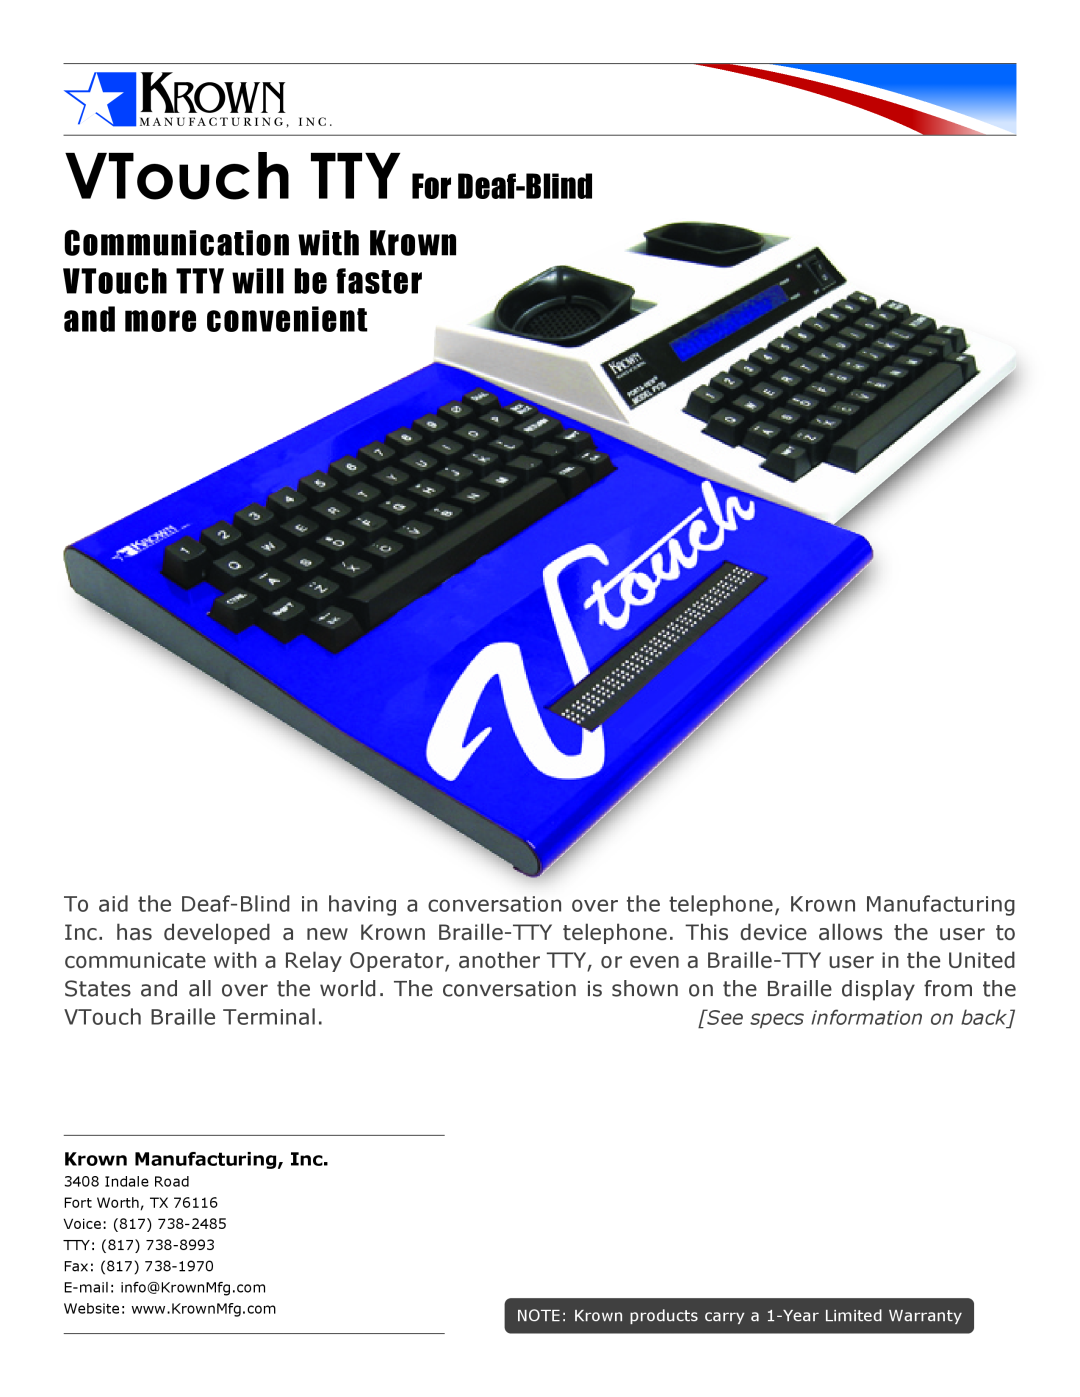 Krown Manufacturing warranty VTouch TTY For Deaf-Blind, Krown Manufacturing, Inc 